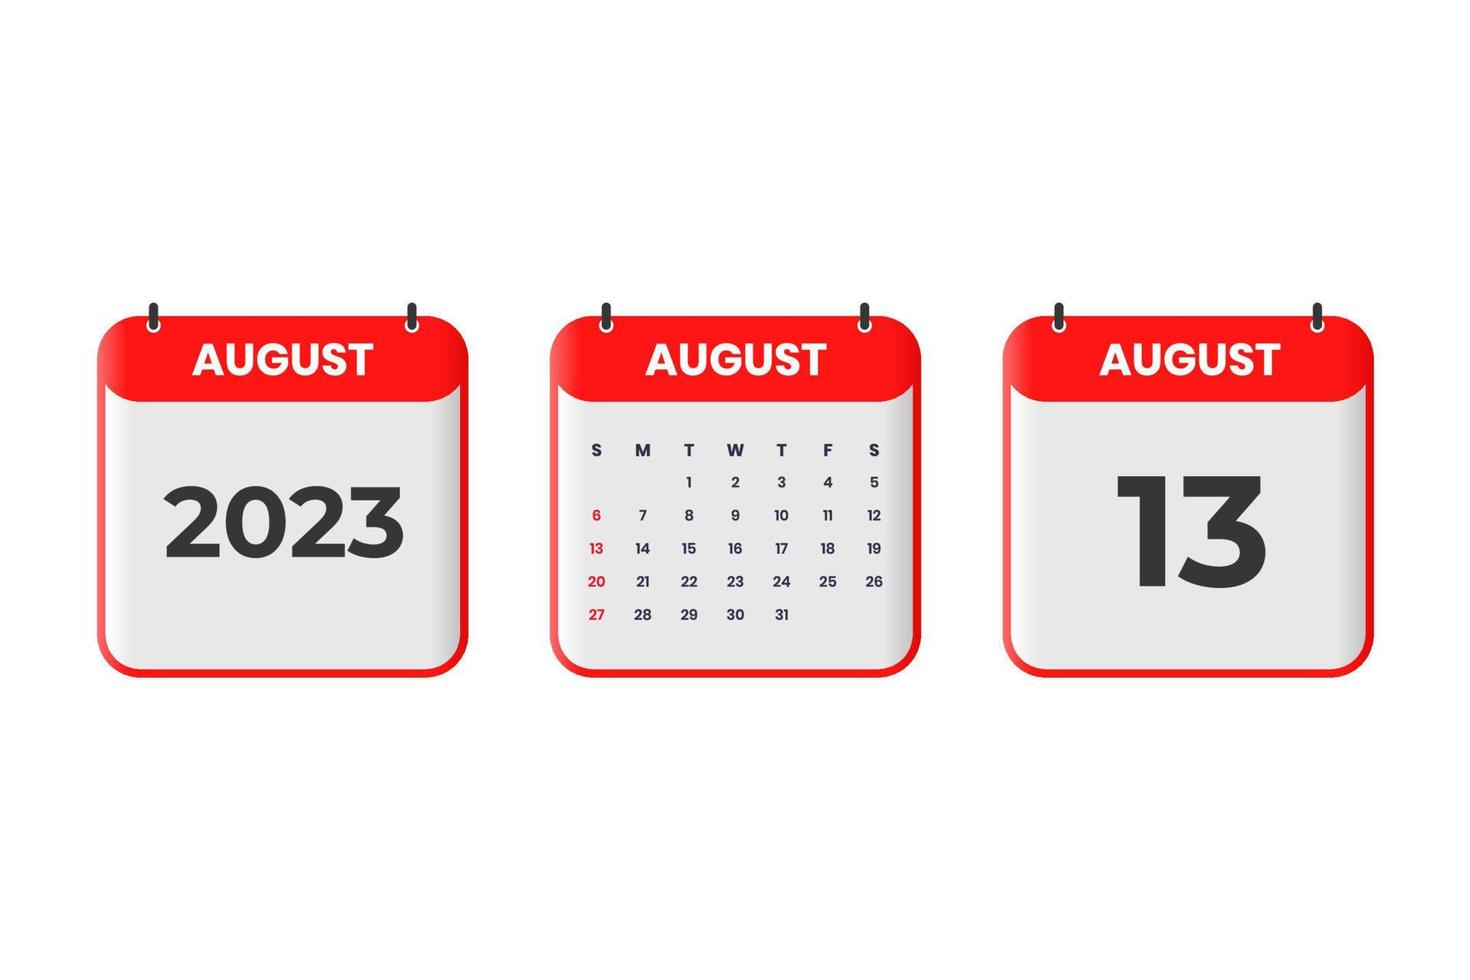 August 2023 calendar design. 13th August 2023 calendar icon for schedule, appointment, important date concept vector